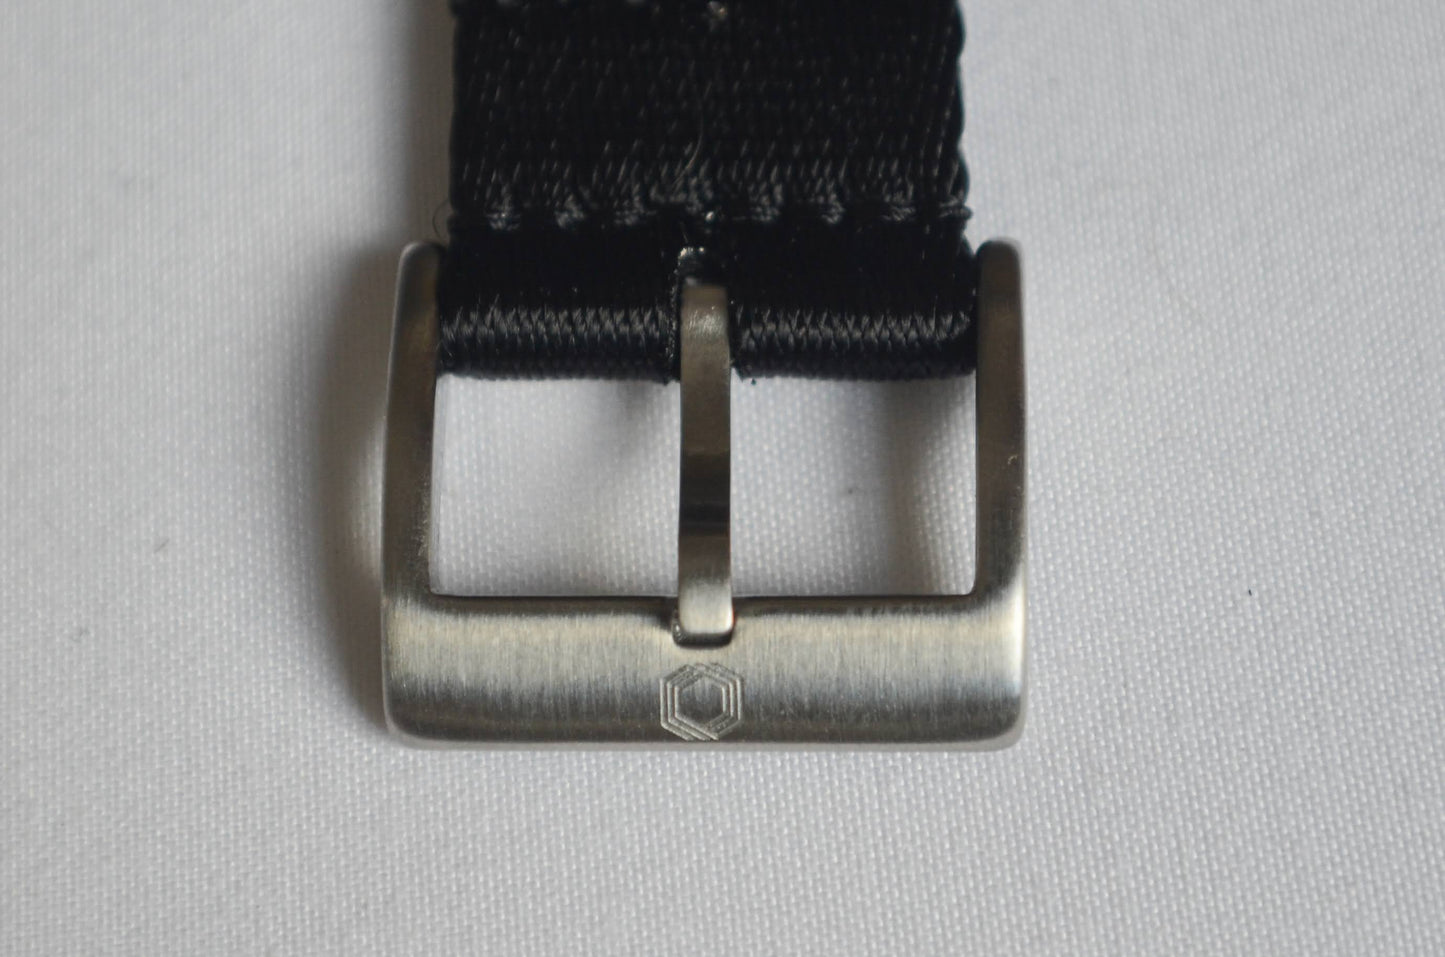 The 'Azumi' - Black adjustable military watch strap made of a soft seat belt nylon